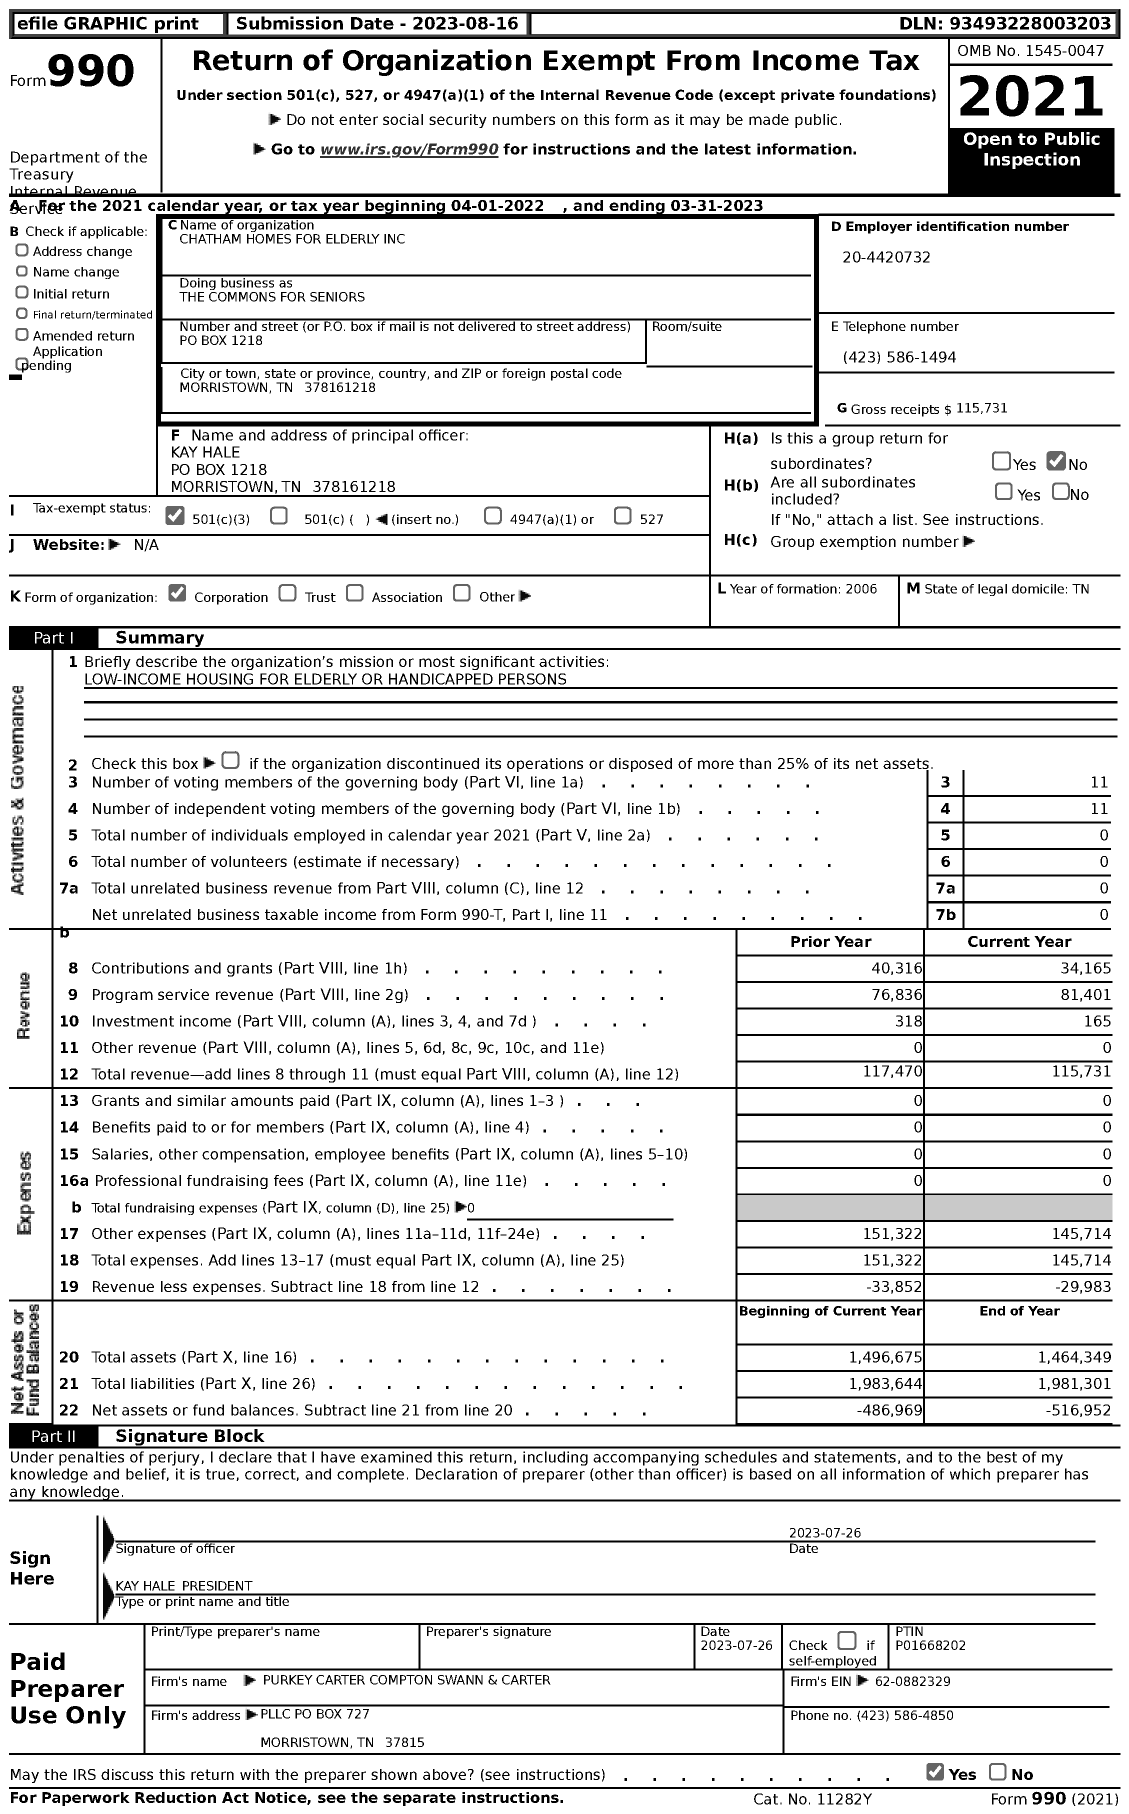 Image of first page of 2022 Form 990 for The Commons for Seniors